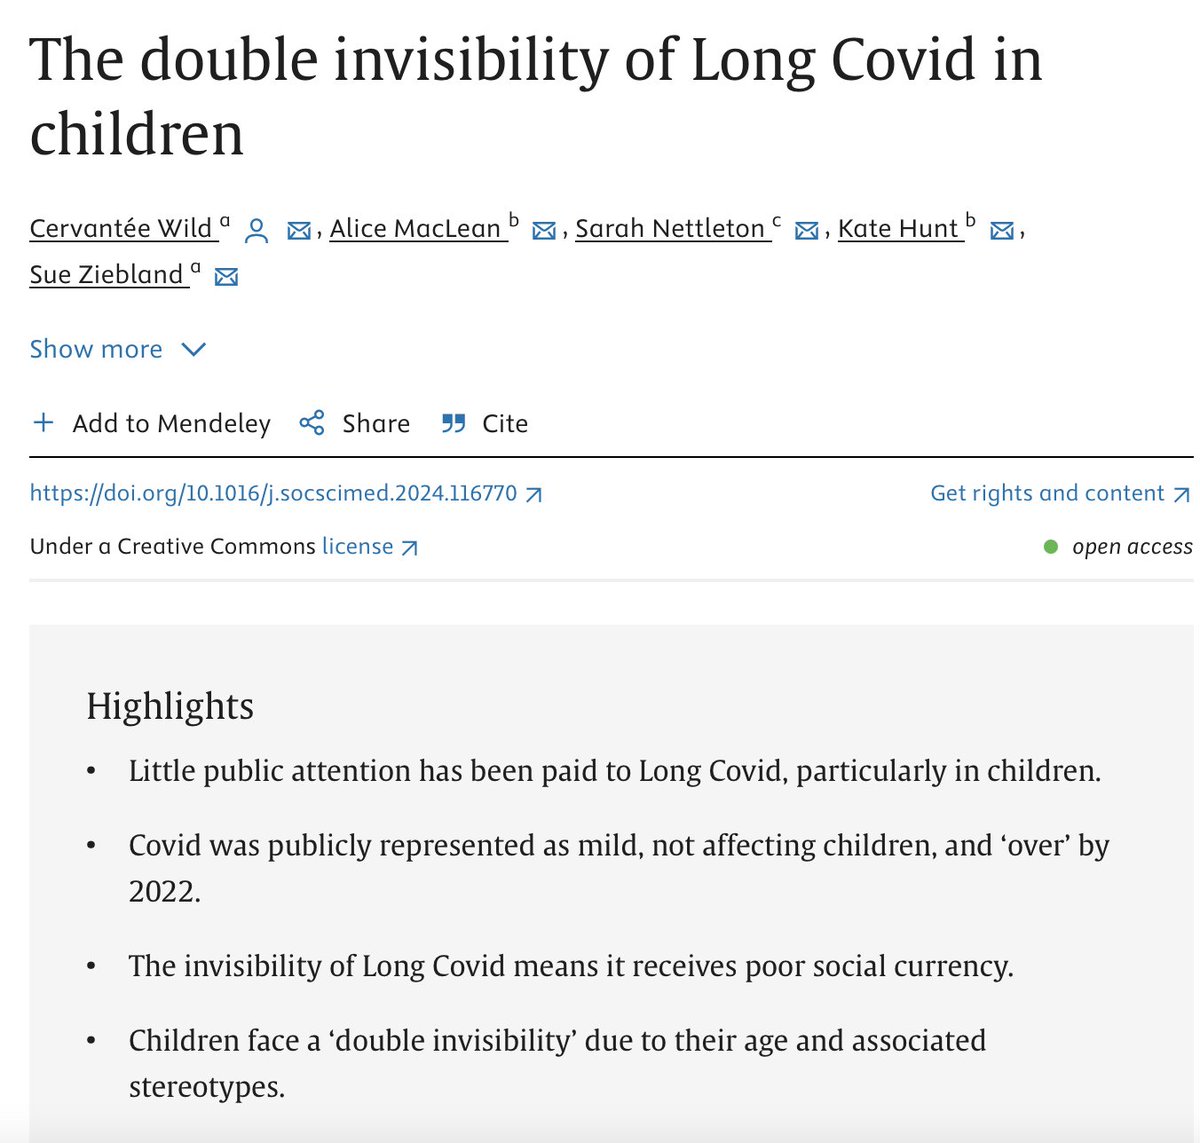 The double invisibility of #LongCovid in children. A paper that will resonate with families across the world. Excellent work from @CervanteeWild & team. Dive in & let us know what you think. sciencedirect.com/science/articl… #LongCovidKids #LongCovidAwarenes @Dr2NisreenAlwan